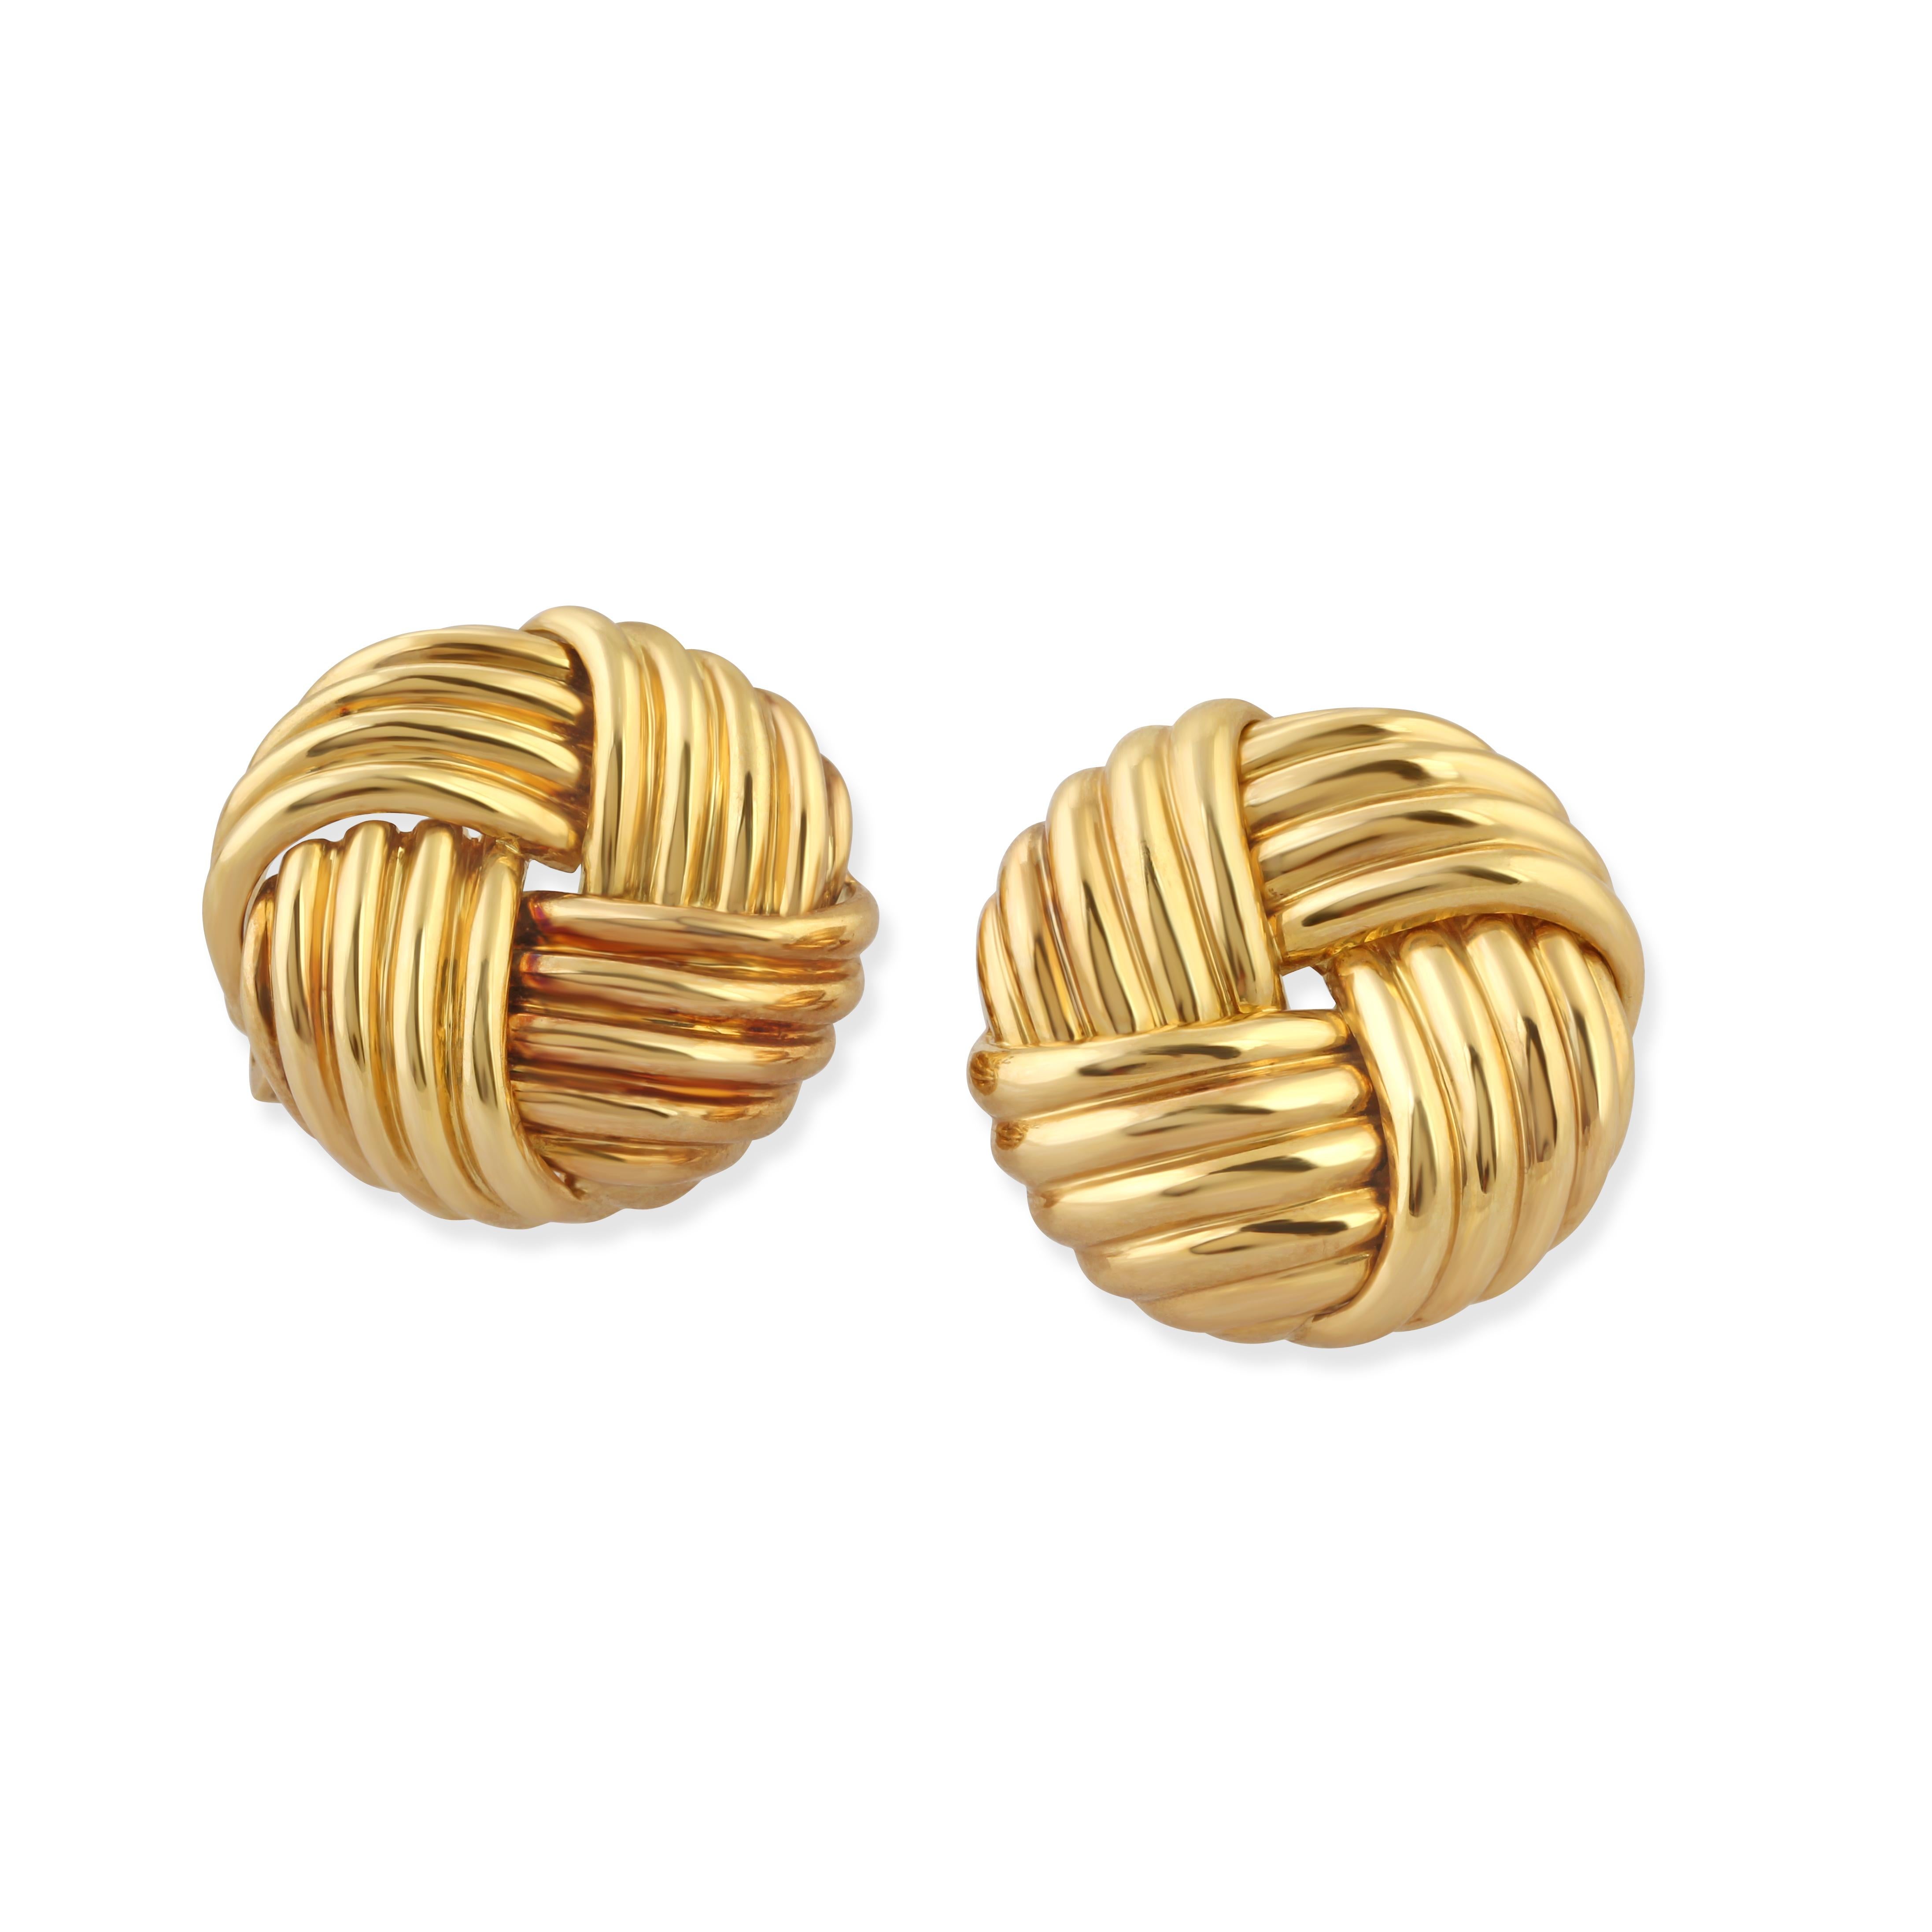 A pair of 18k gold knot earrings by Boucheron.